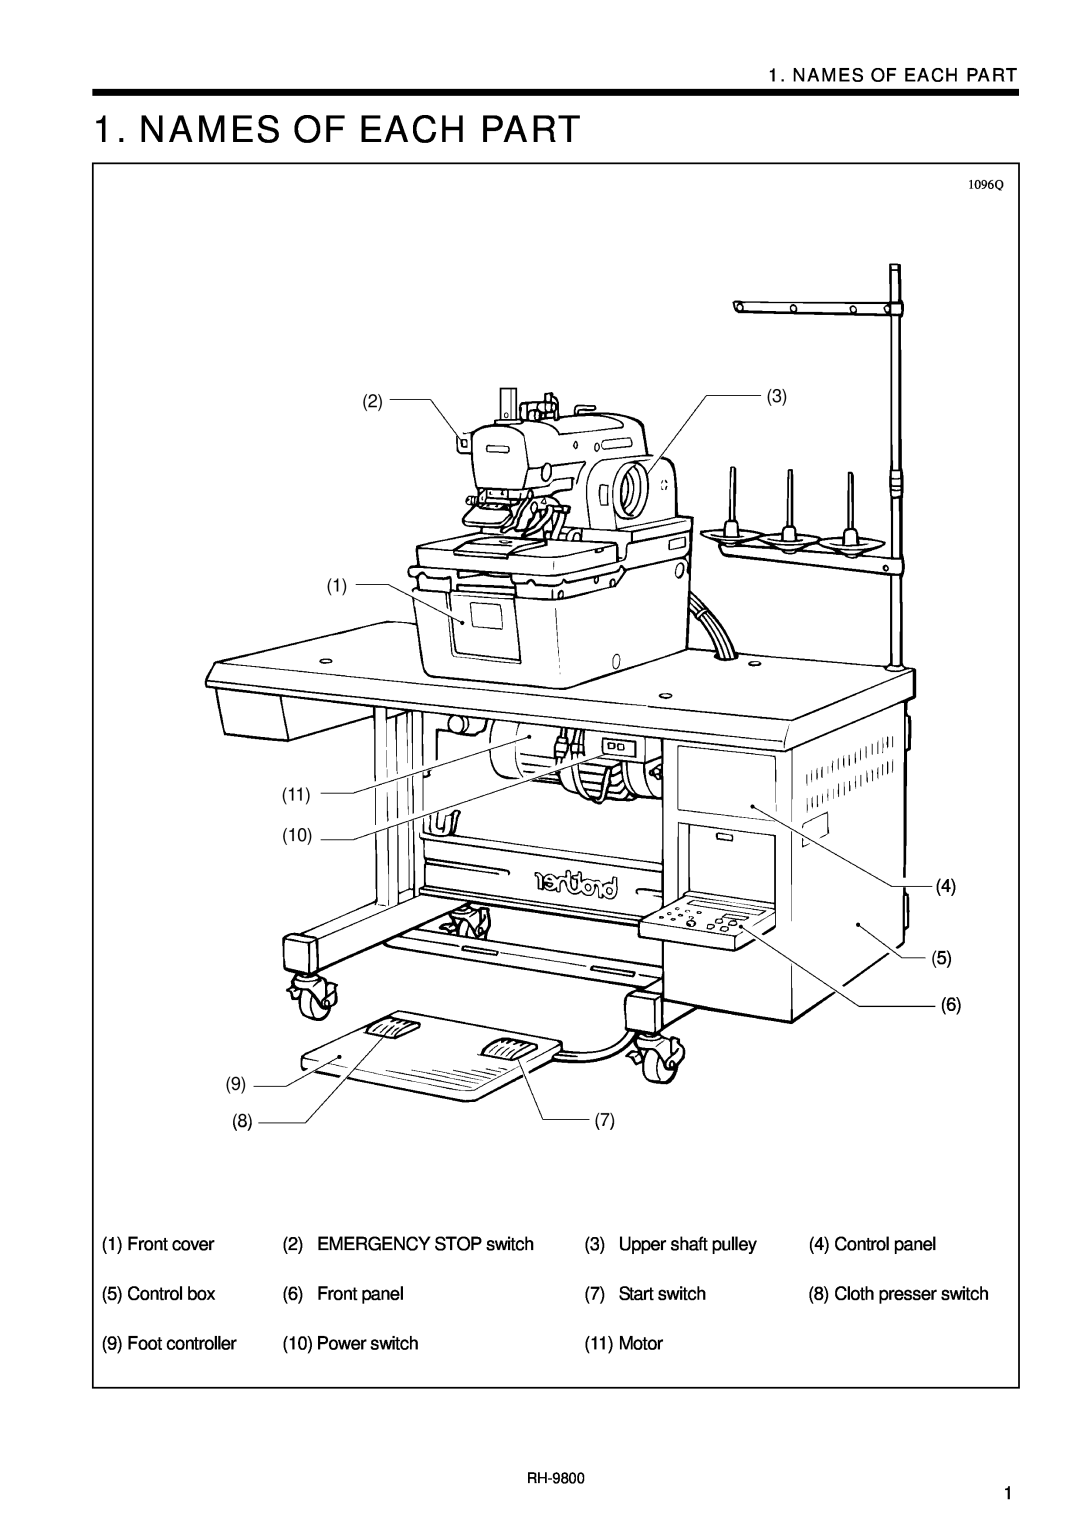 Brother DH4-B980 instruction manual Names Of Each Part 